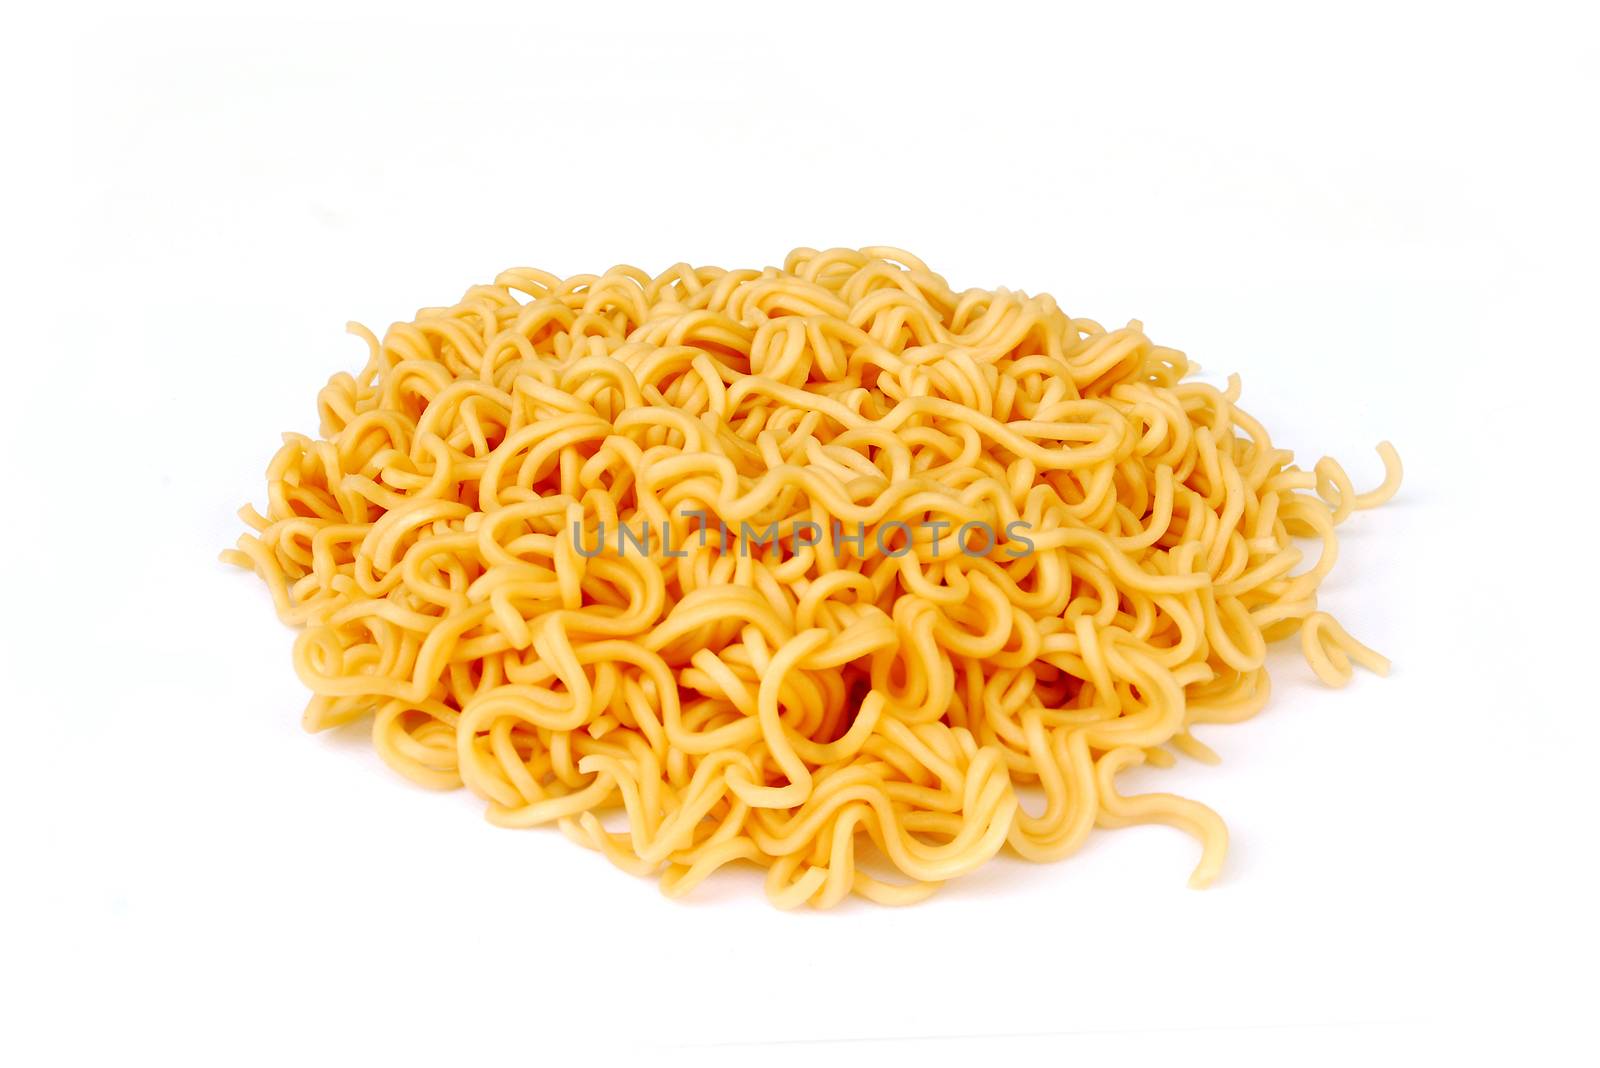 Instant noodles on white background.